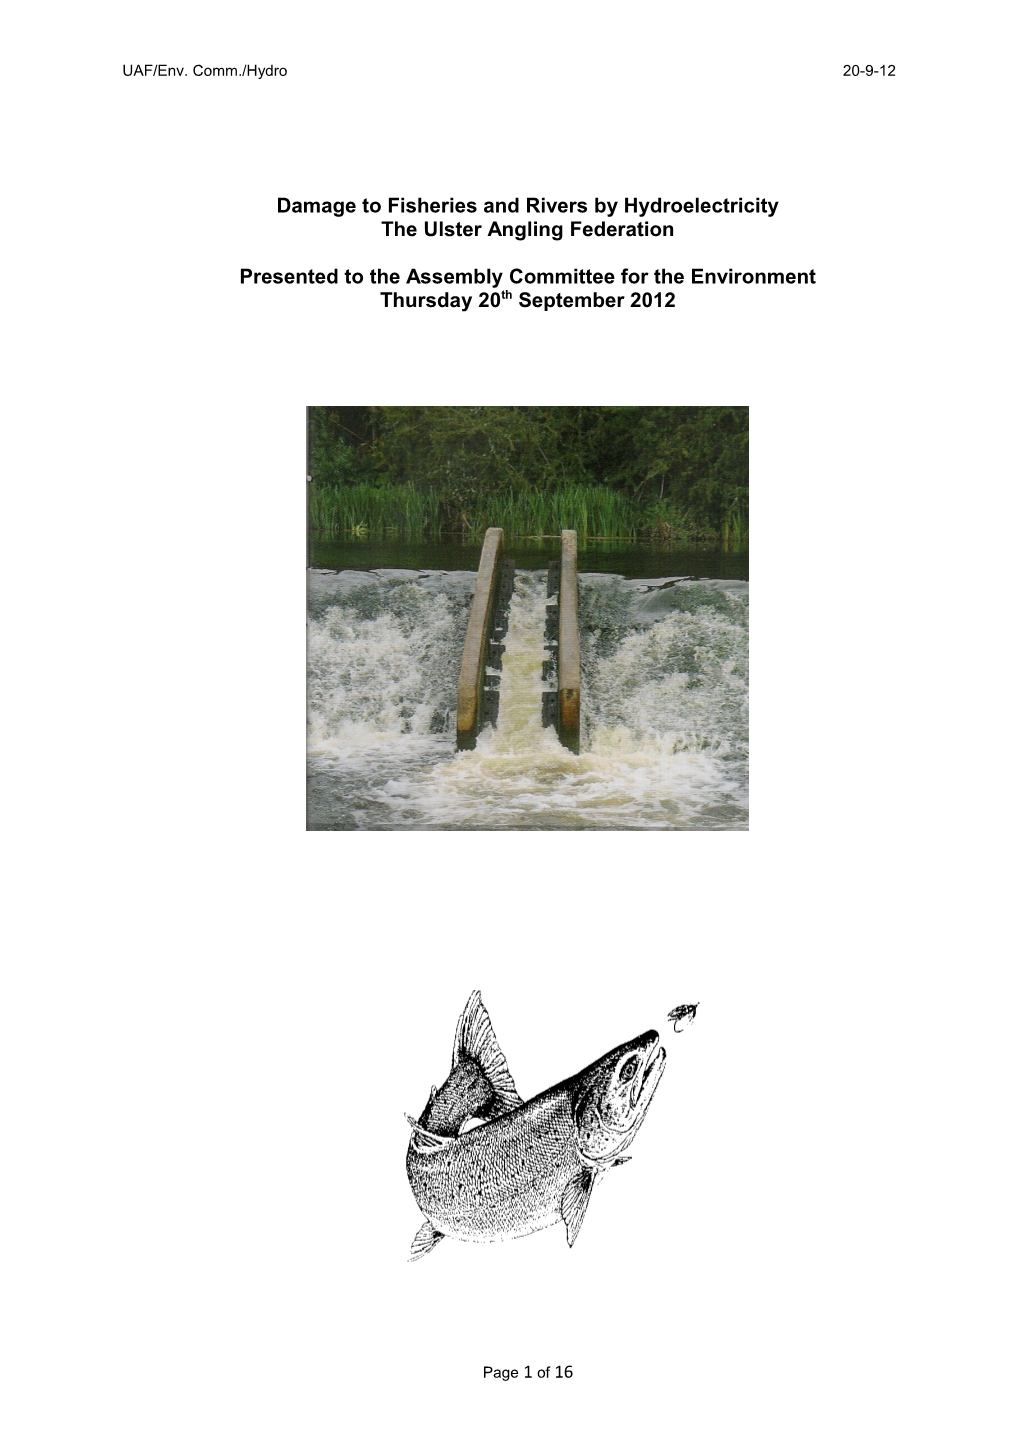 Damage to Fisheries and Rivers by Hydroelectricity